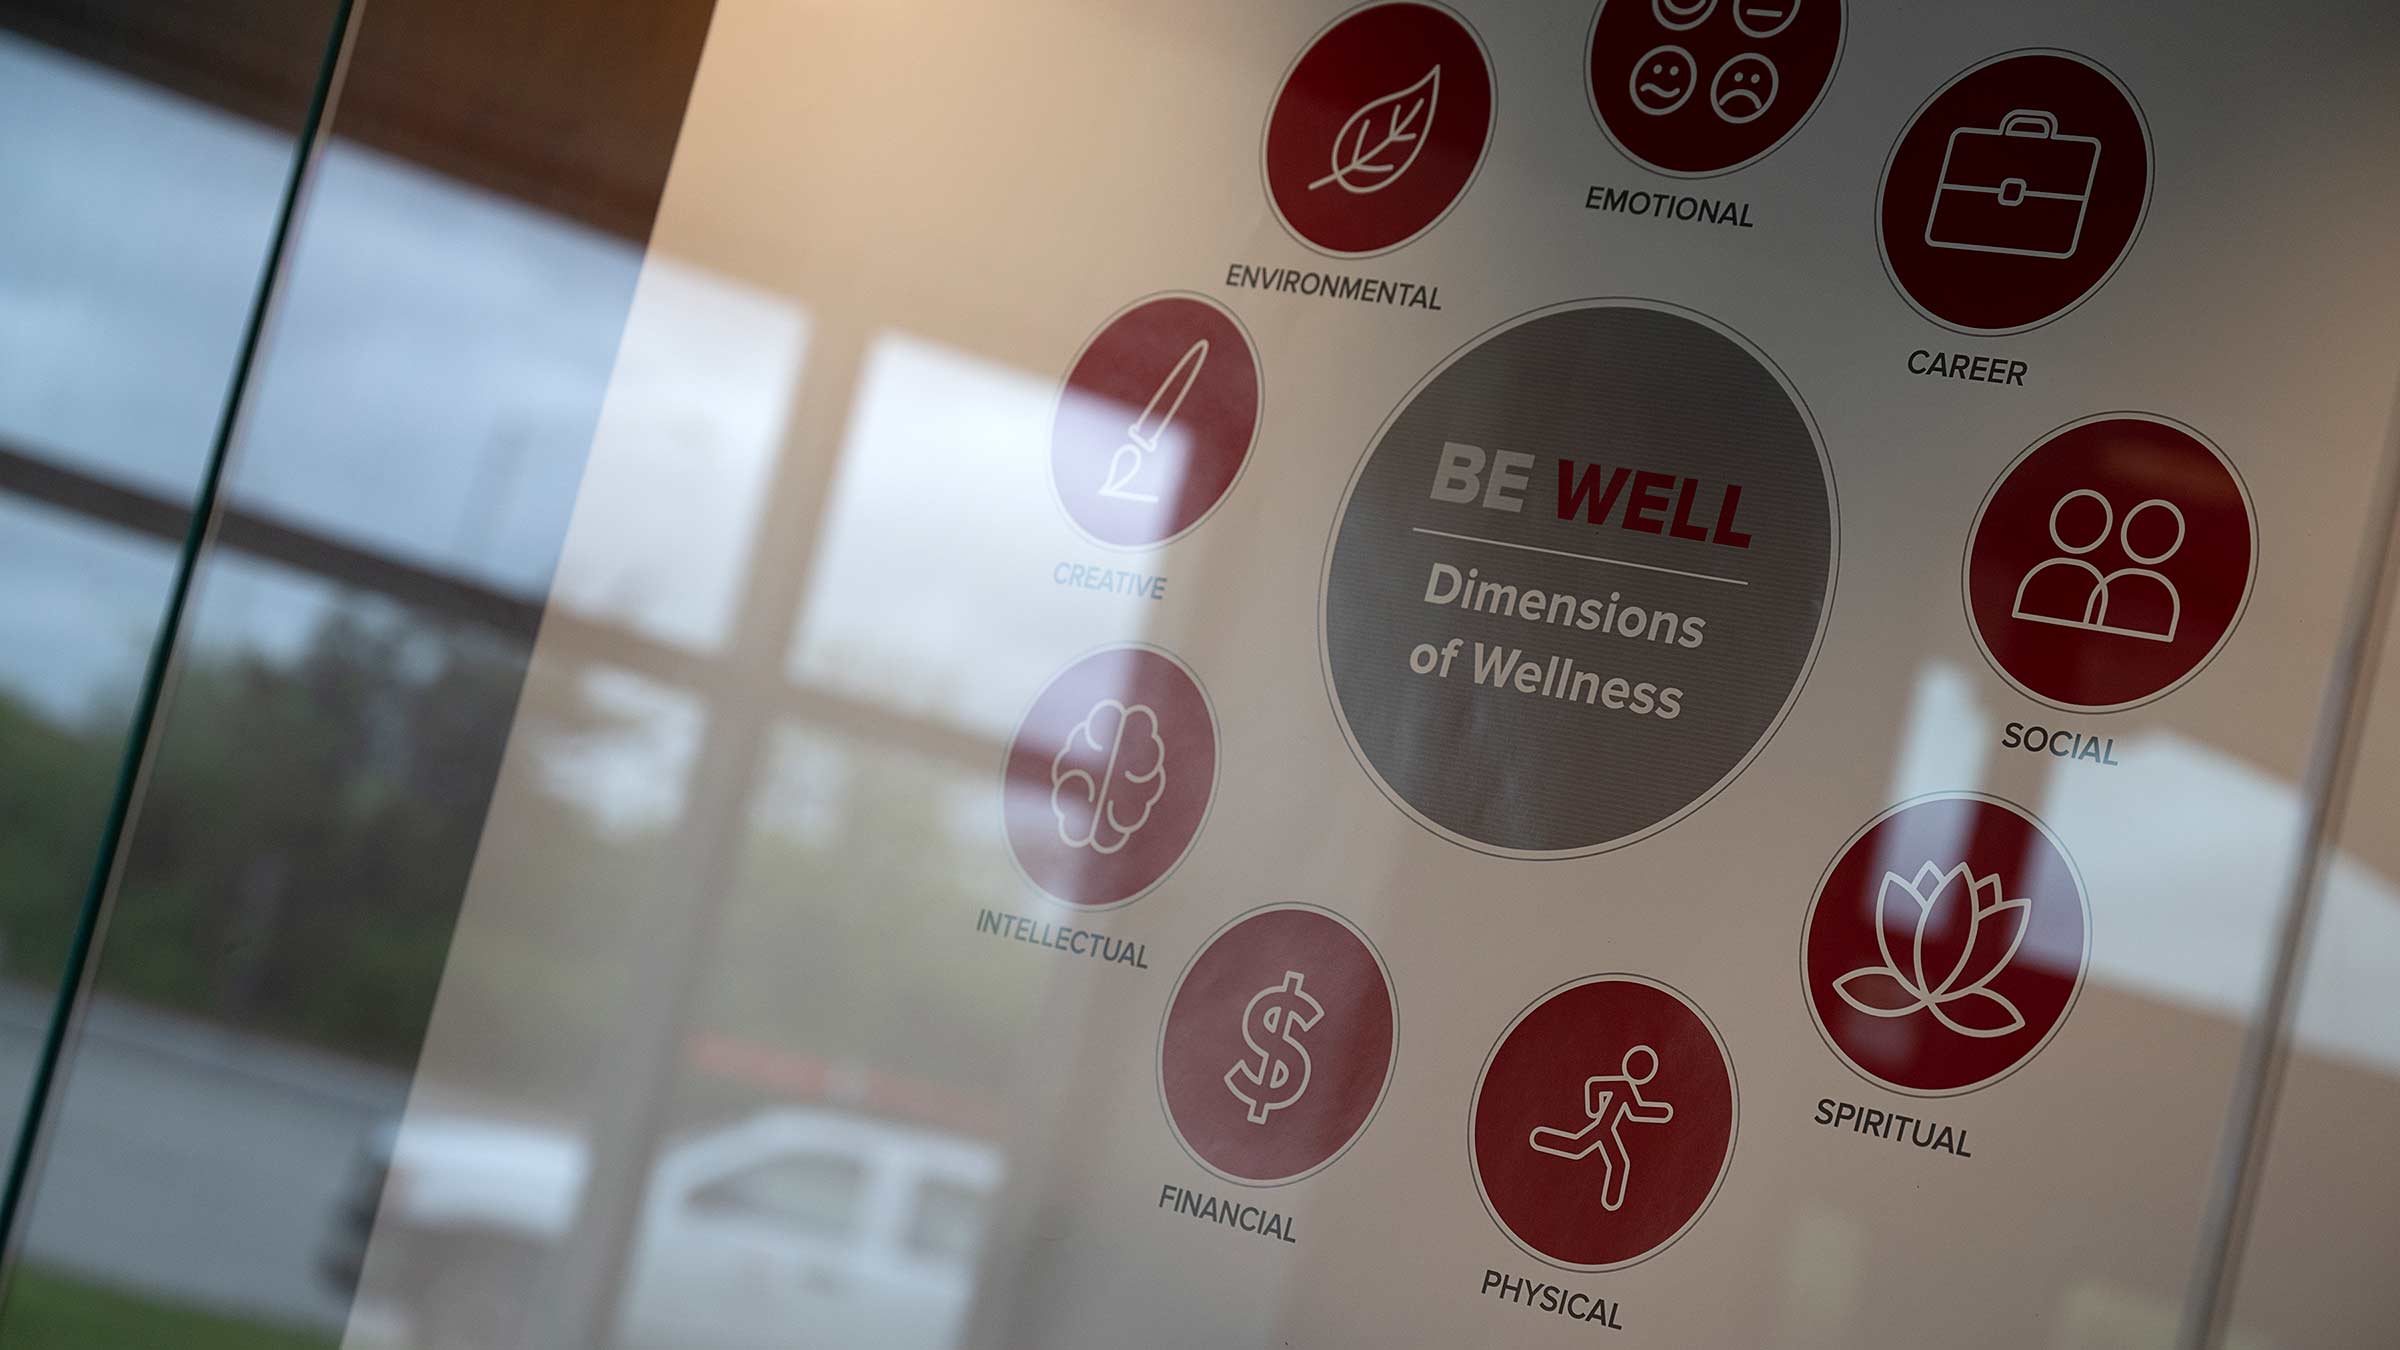 Be well program graphics poster